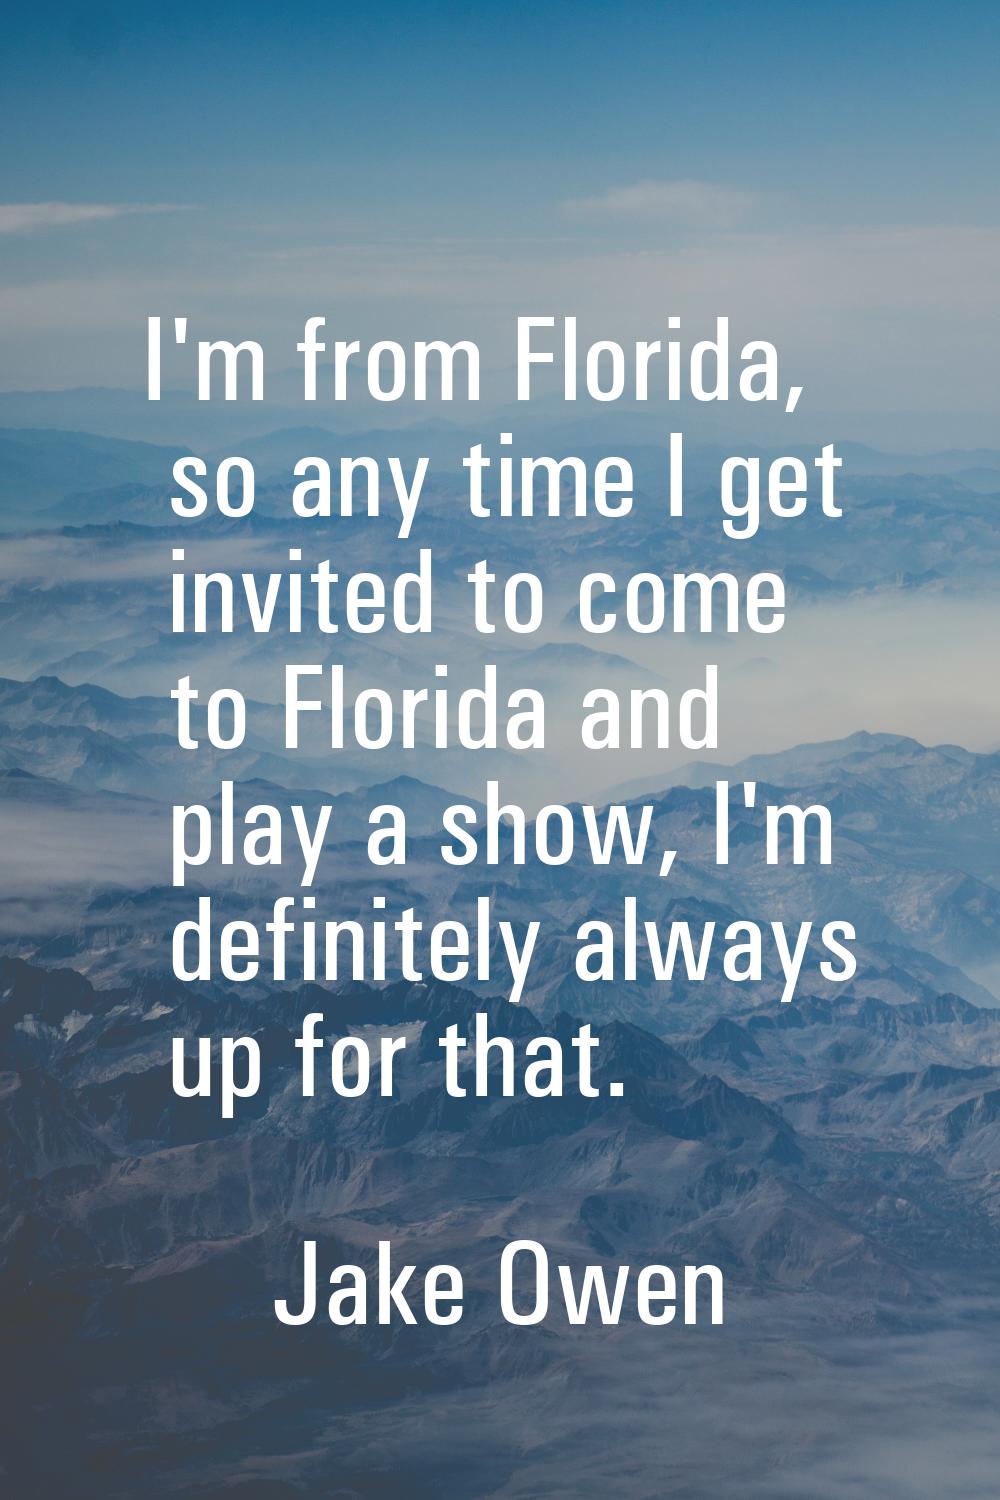 I'm from Florida, so any time I get invited to come to Florida and play a show, I'm definitely alwa